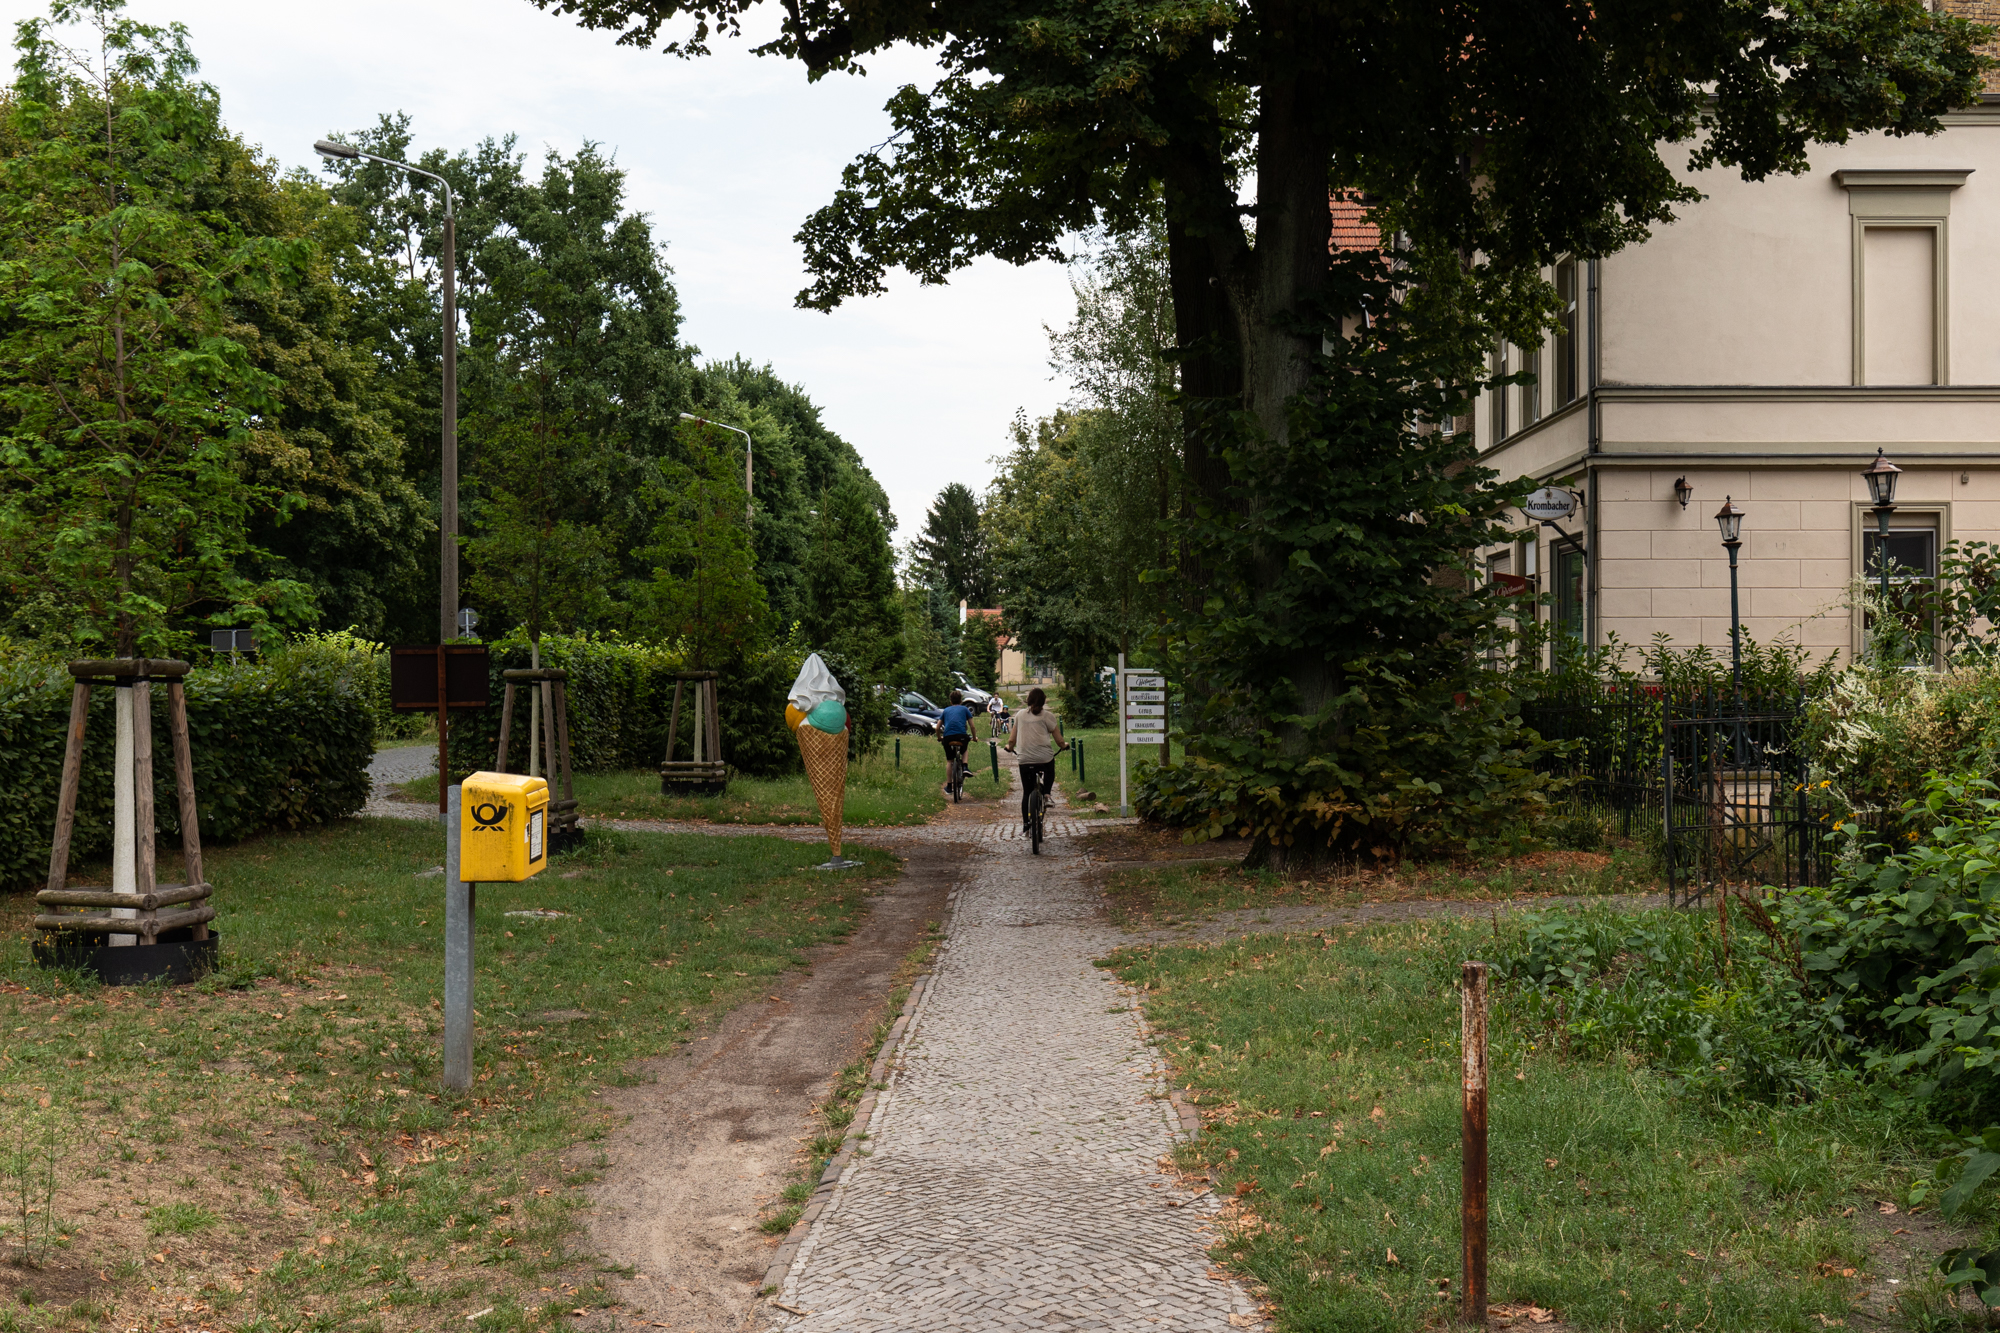 Waldmüllerstrasse in Klein Glienicke - a former East German enclave separated from West Berlin by the Berlin Wall and only accessible with special permission